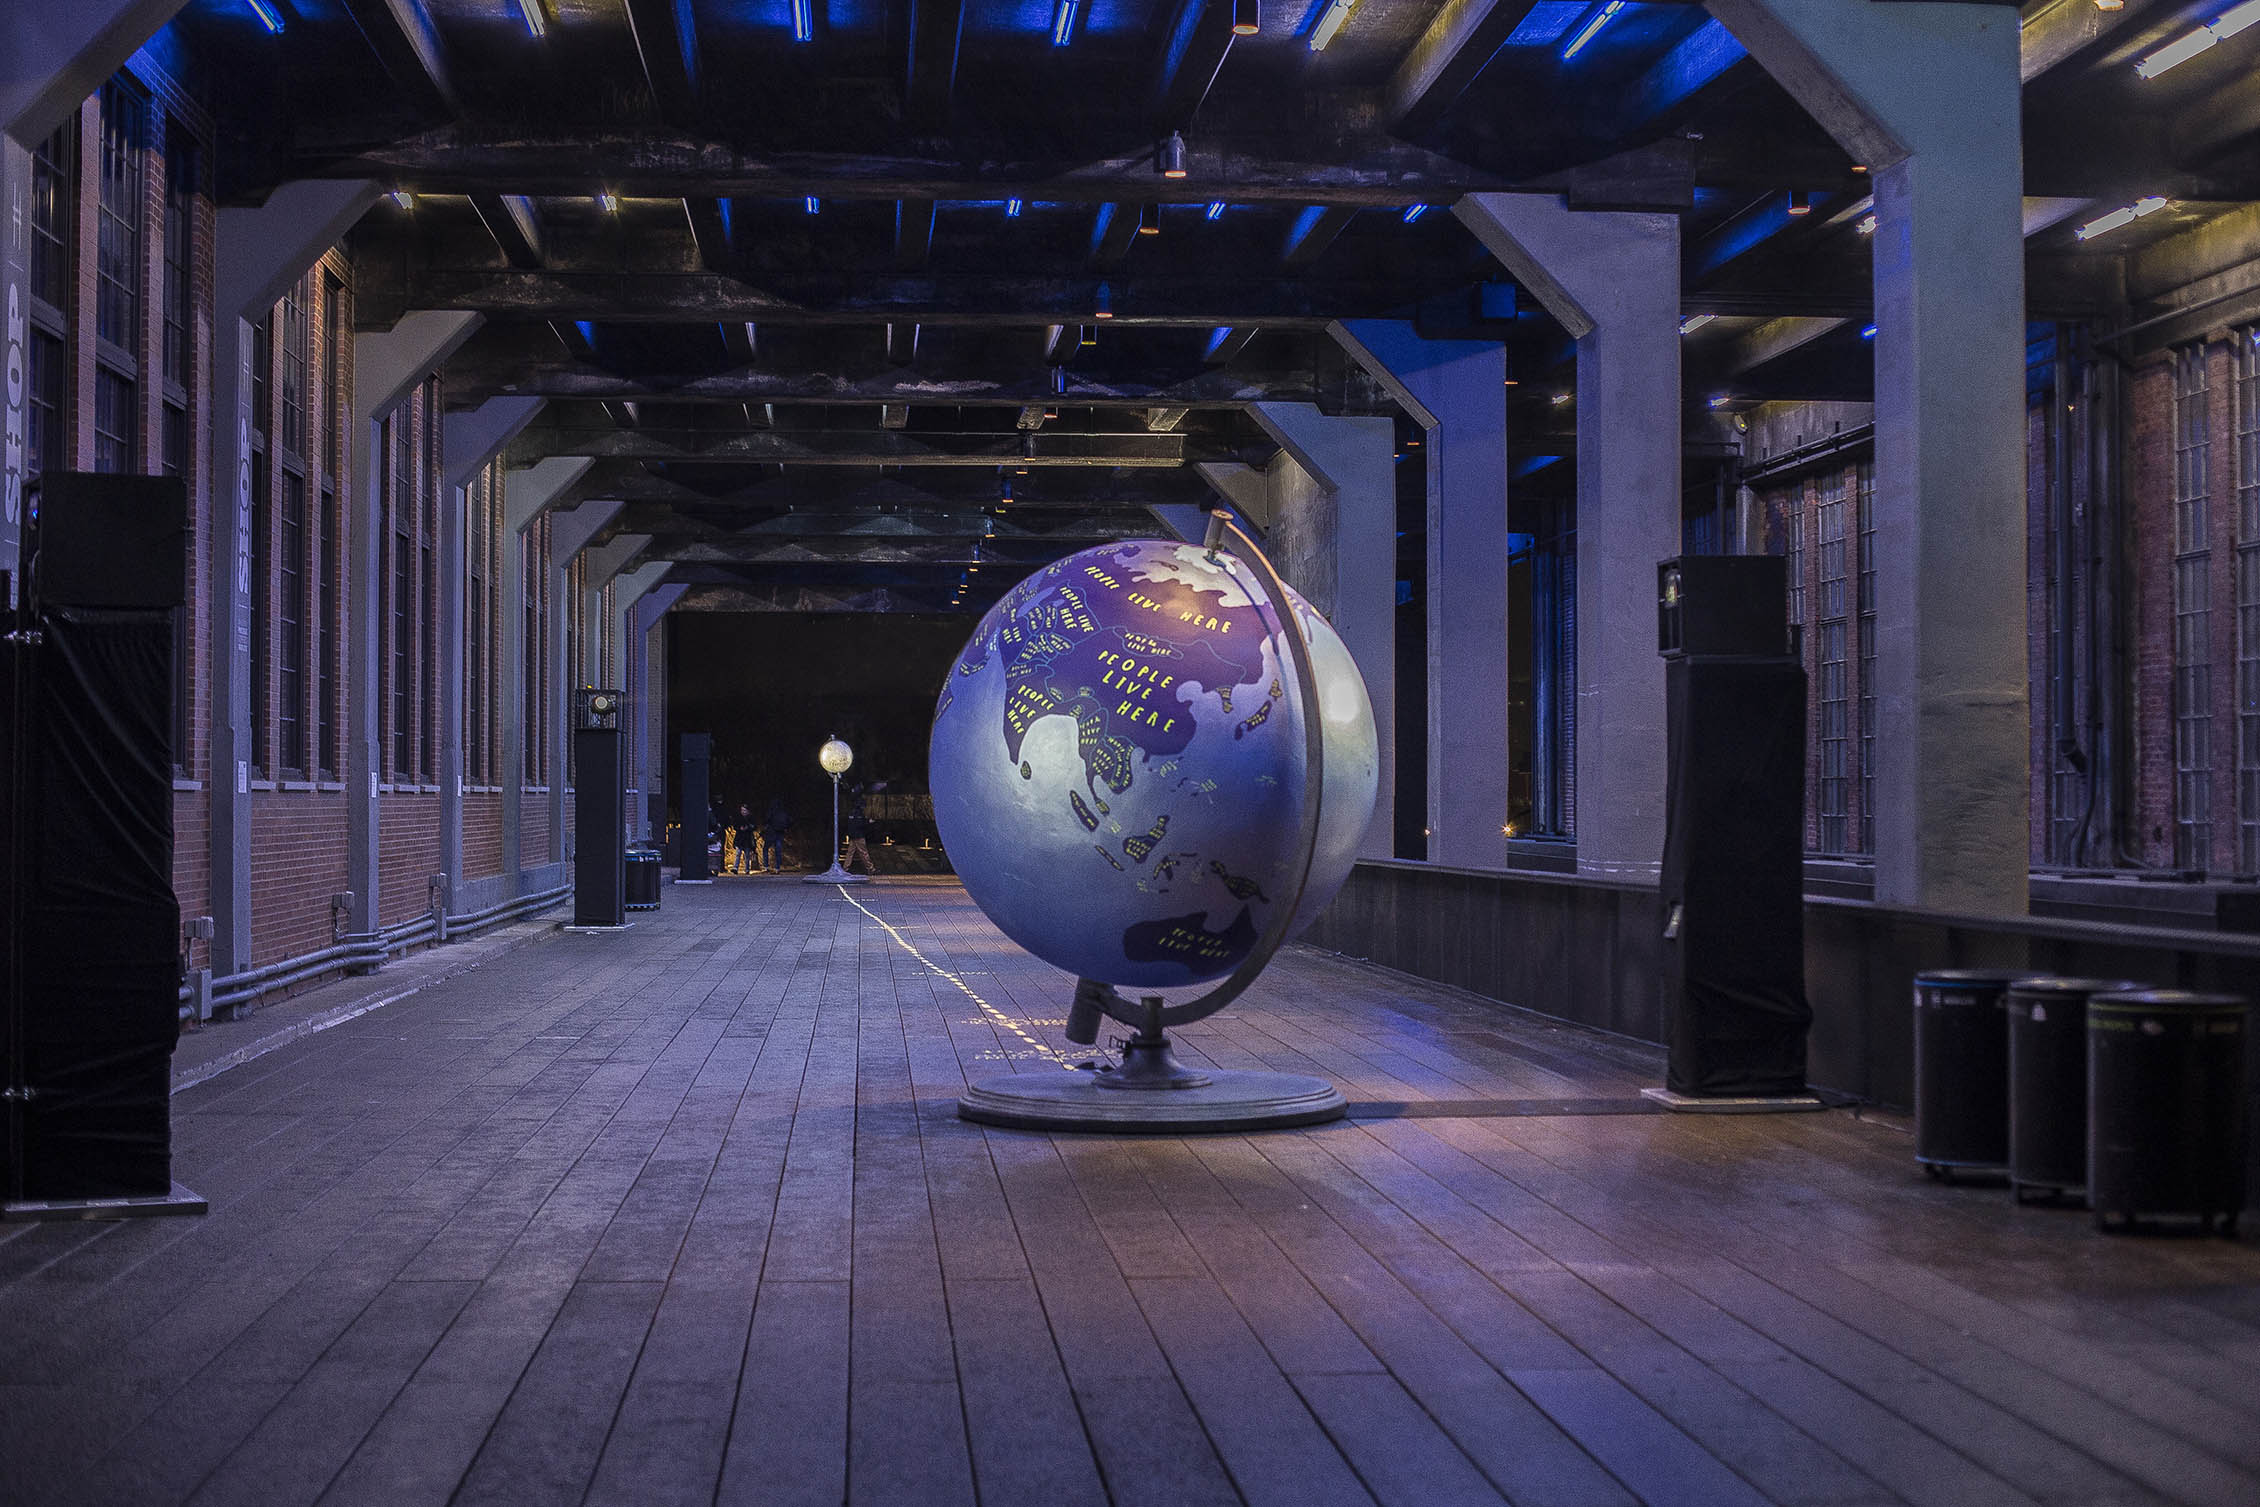 Jeffers's The Moon, the Earth and Us on view on the High Line between 15th and 16th Streets until February 14.